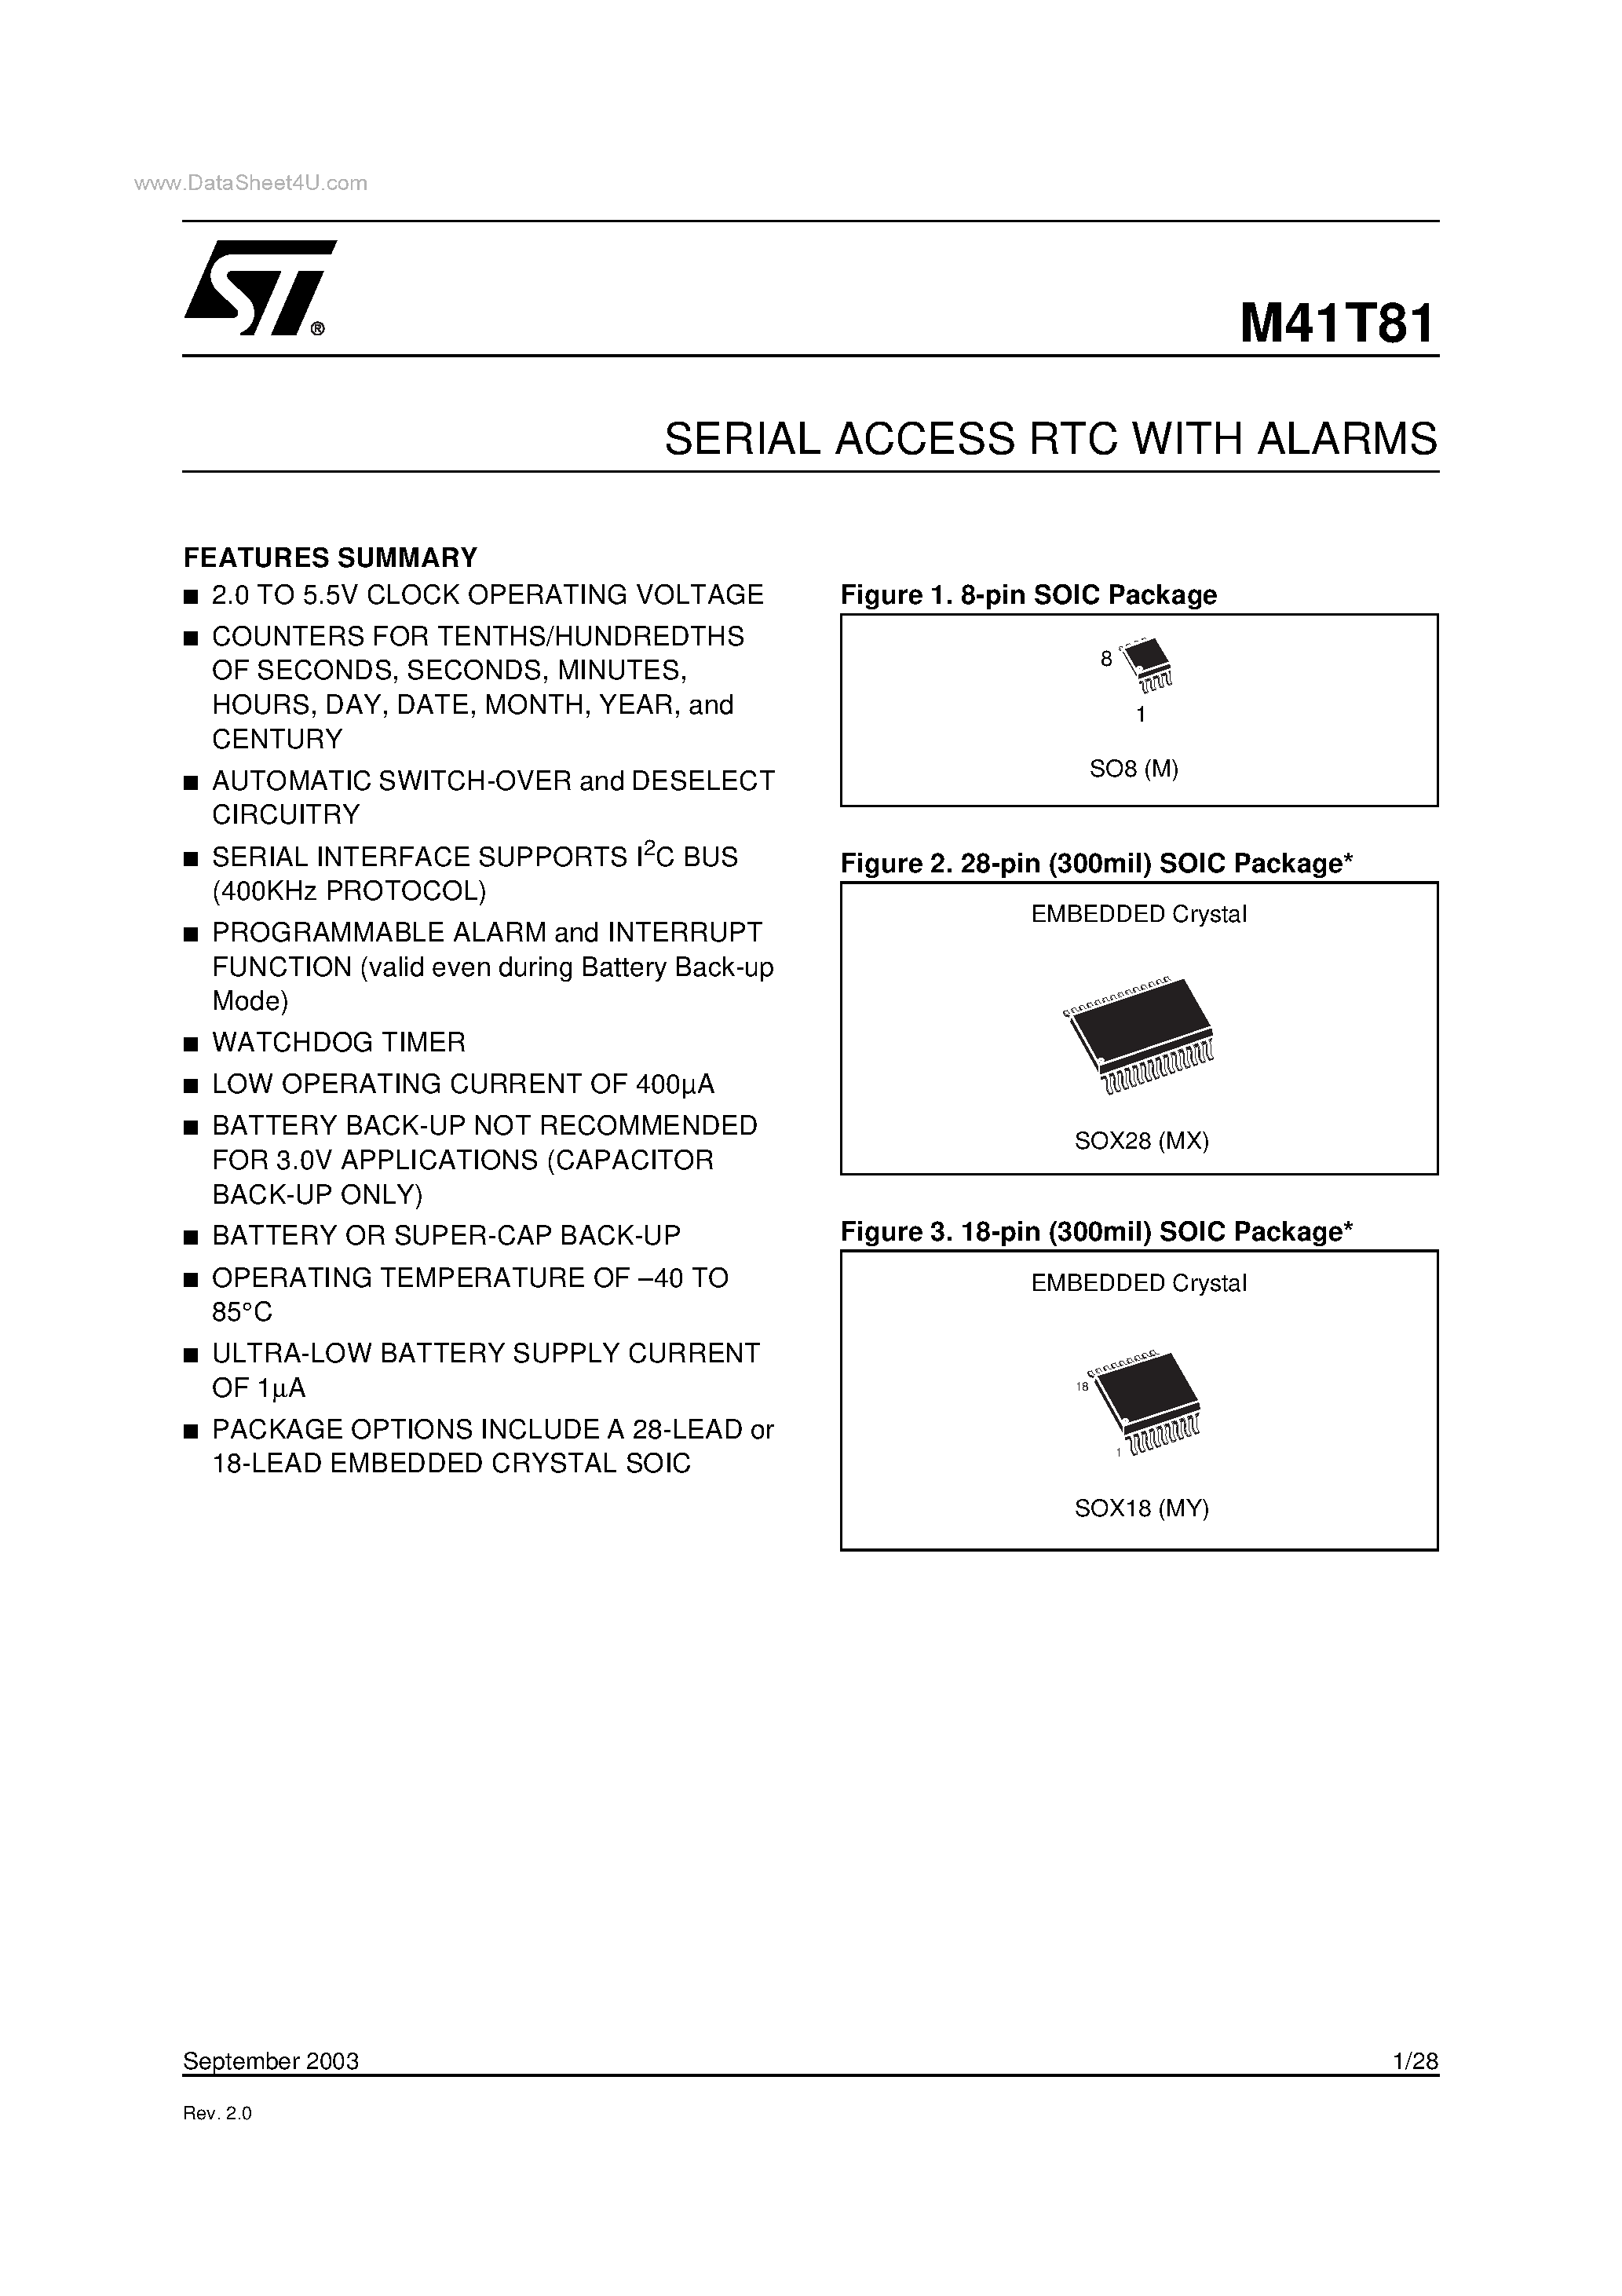 Datasheet M41T81M6TR - SERIAL ACCESS RTC WITH ALARMS page 1